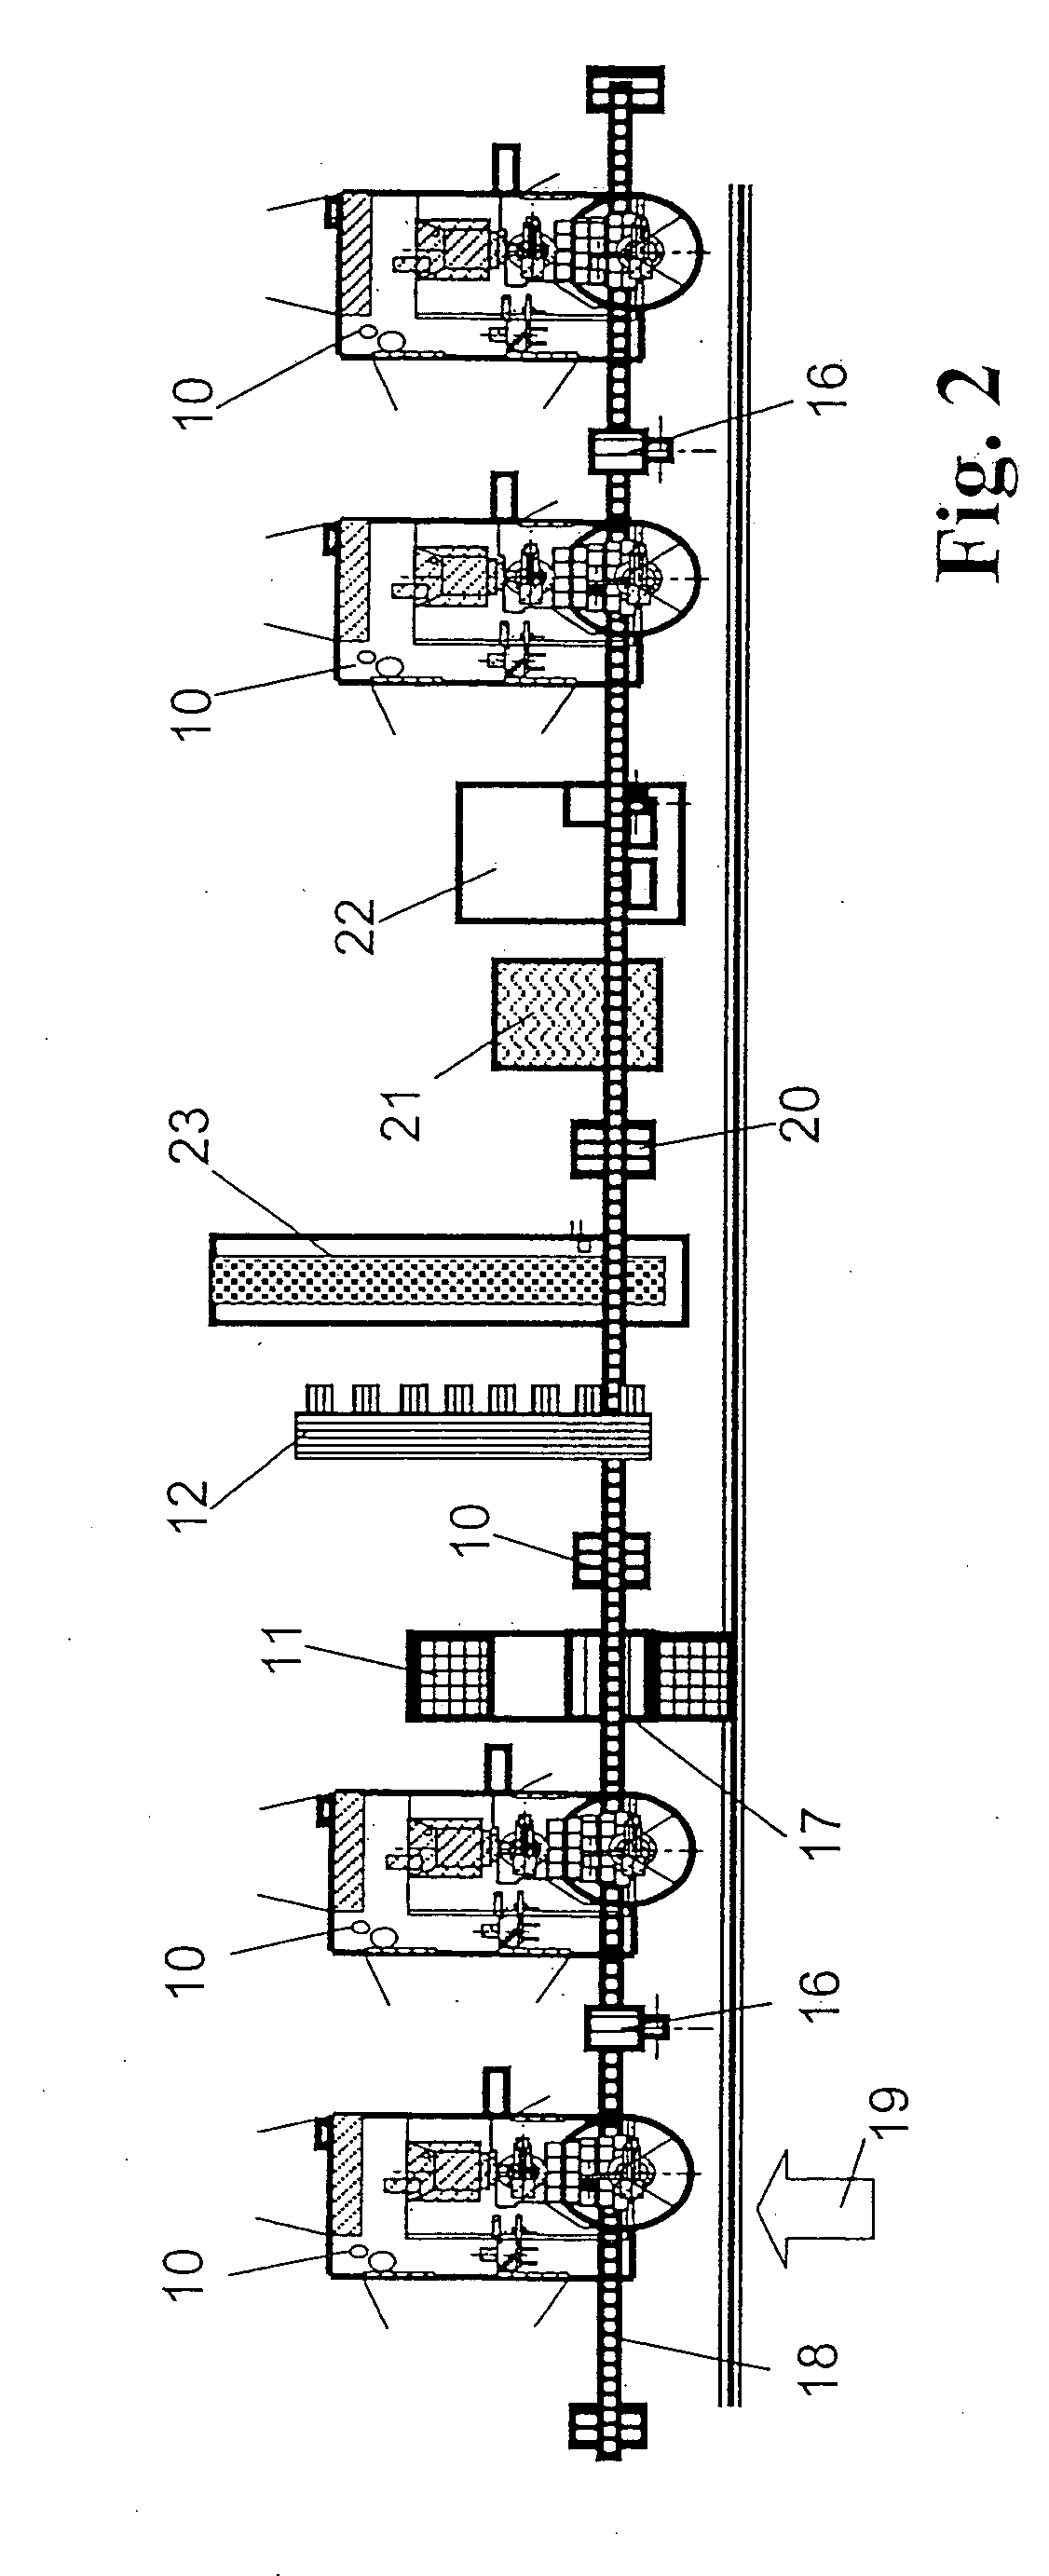 Method and apparatus for machining a blank from all directions